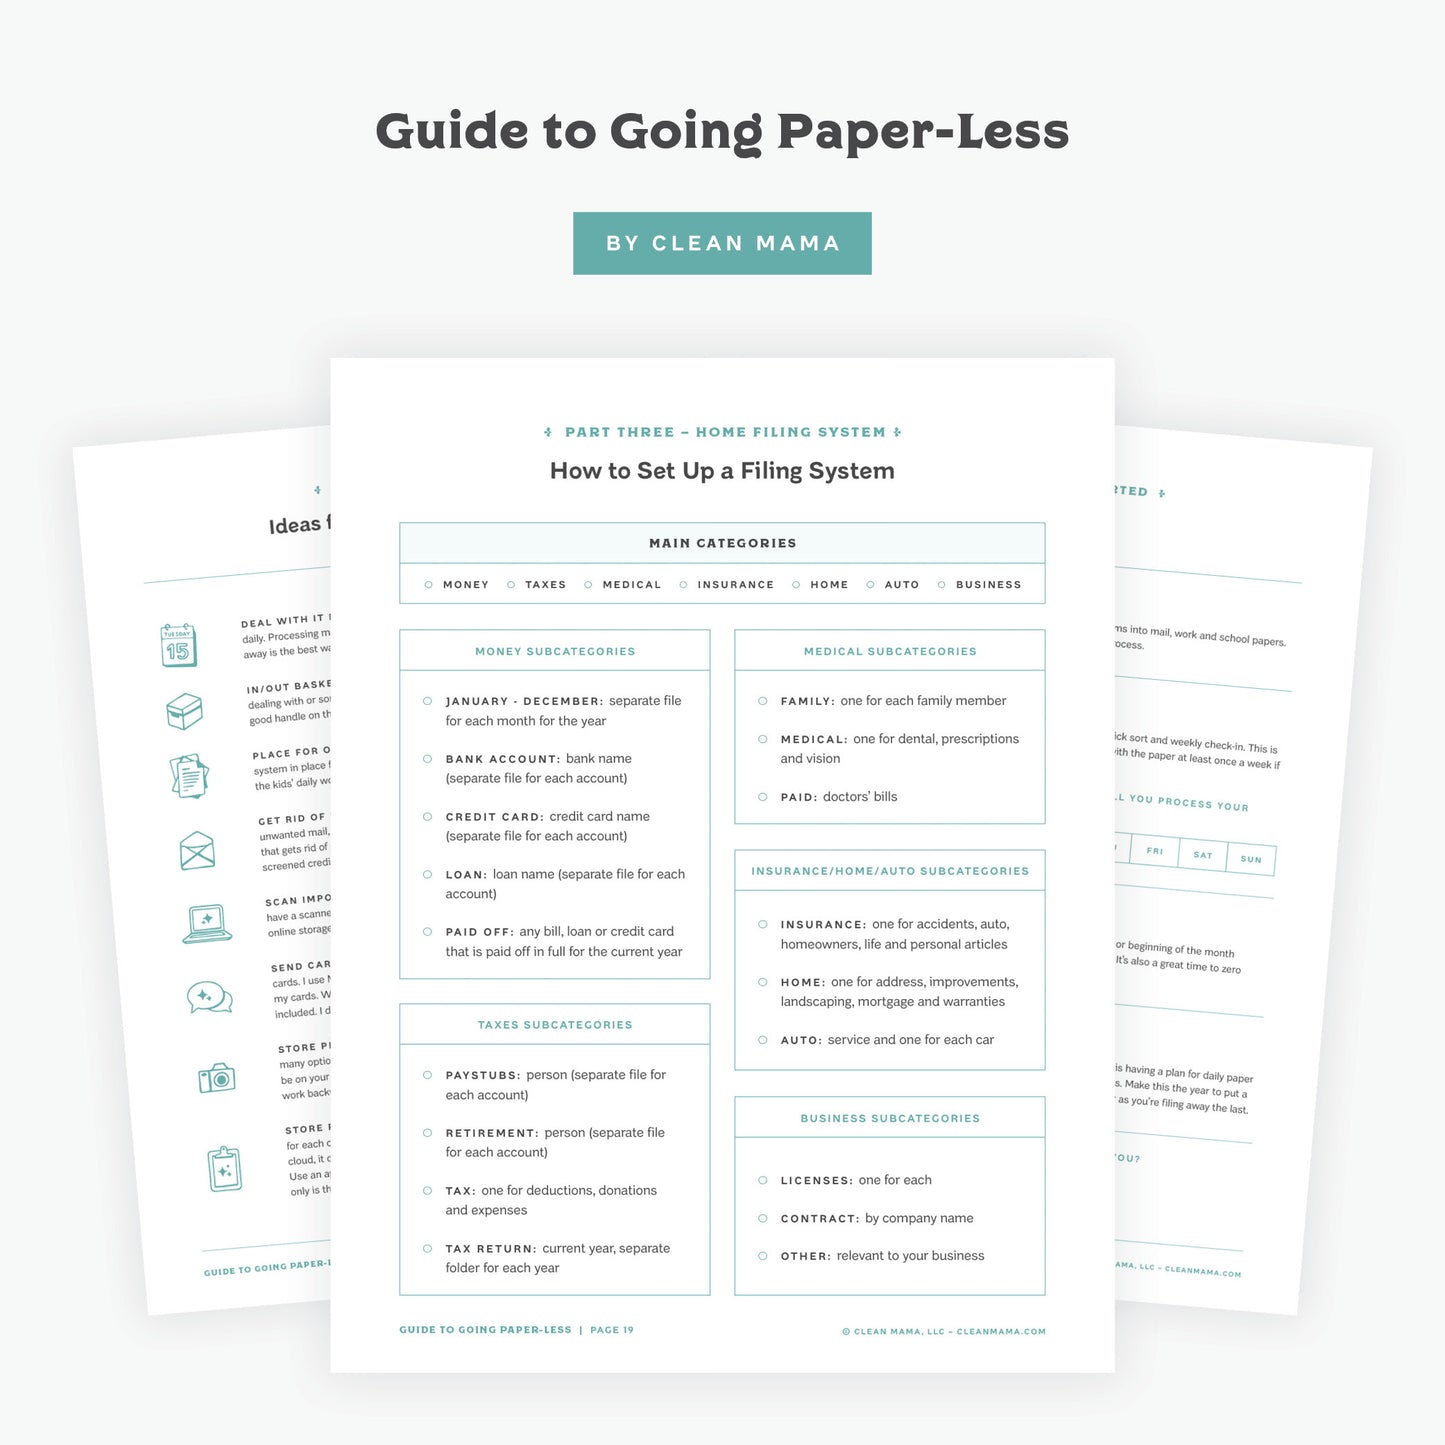 Guide to Going Paper-Less